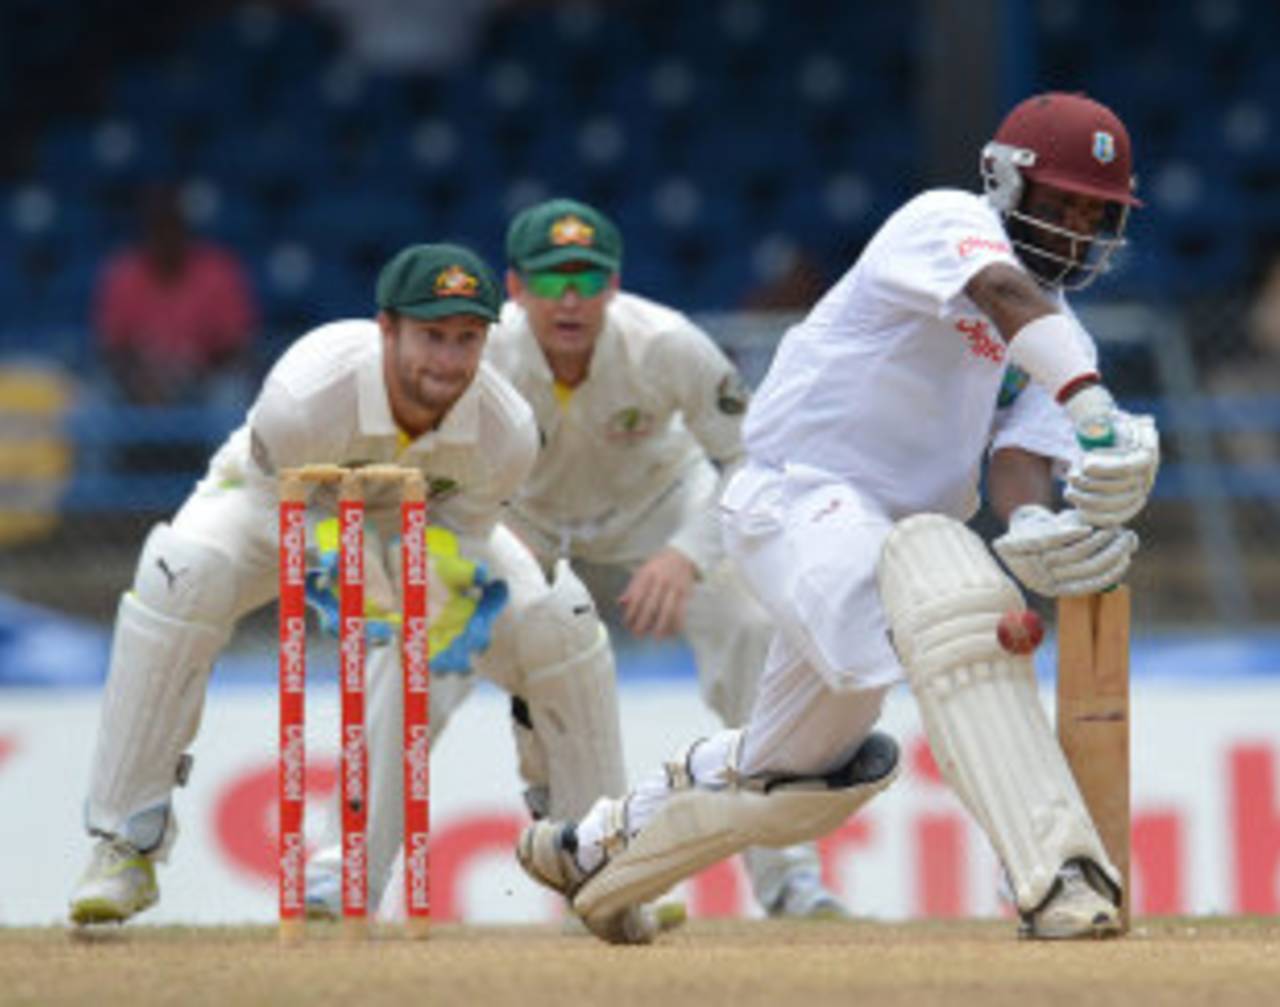 Narsingh Deonarine smothers the spin, West Indies v Australia, 2nd Test, Port-of-Spain, April 17, 2012